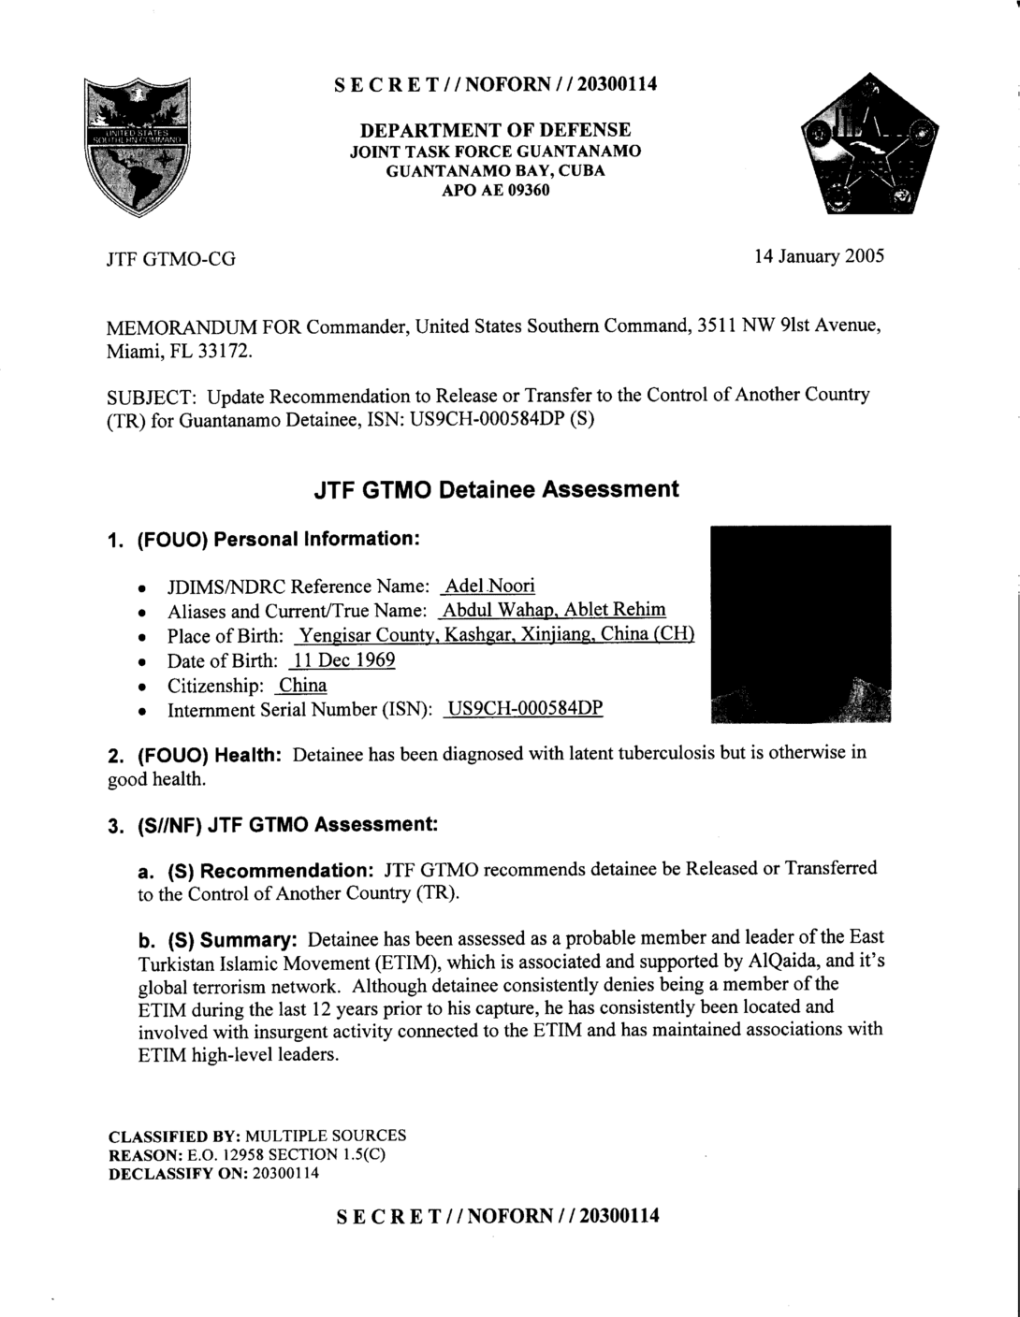 3. (SI/NF) JTF GTMO Assessment